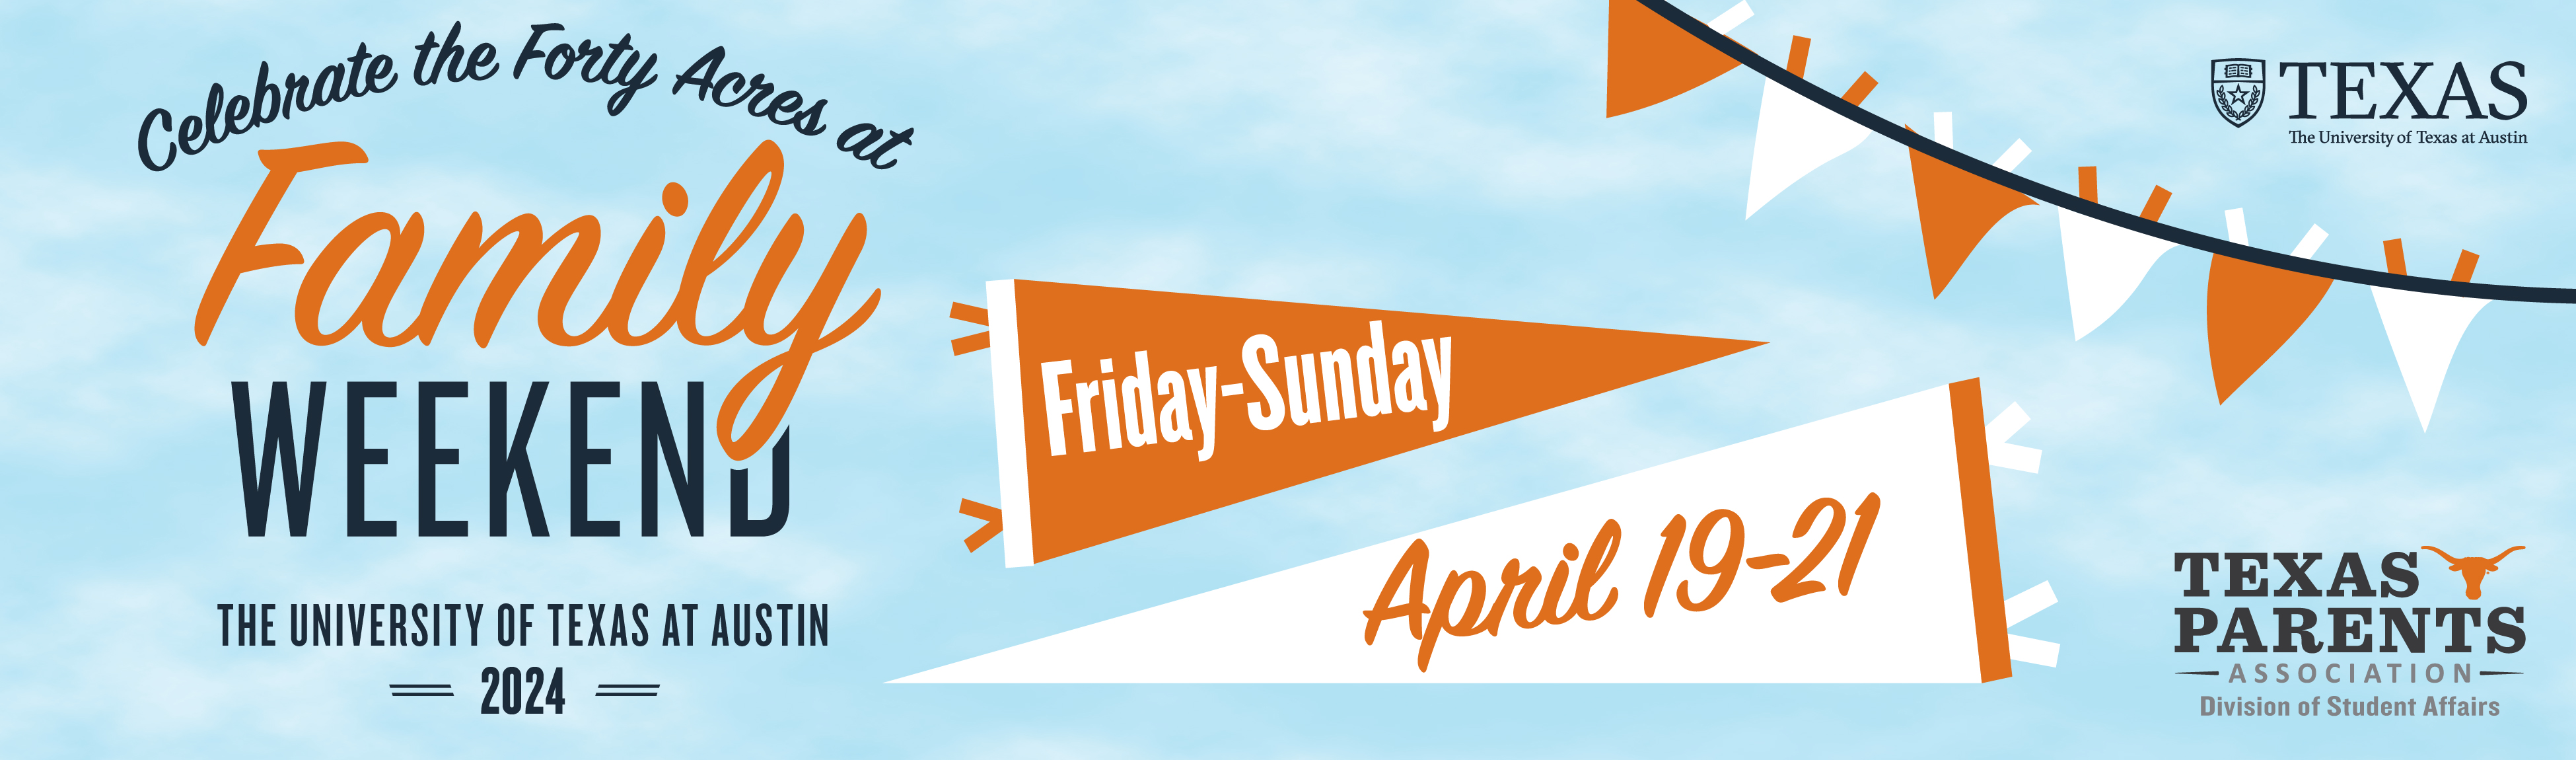 Celebrate the Forty Acres at Family Weekend on Friday-Sunday, April 19-21, 2024